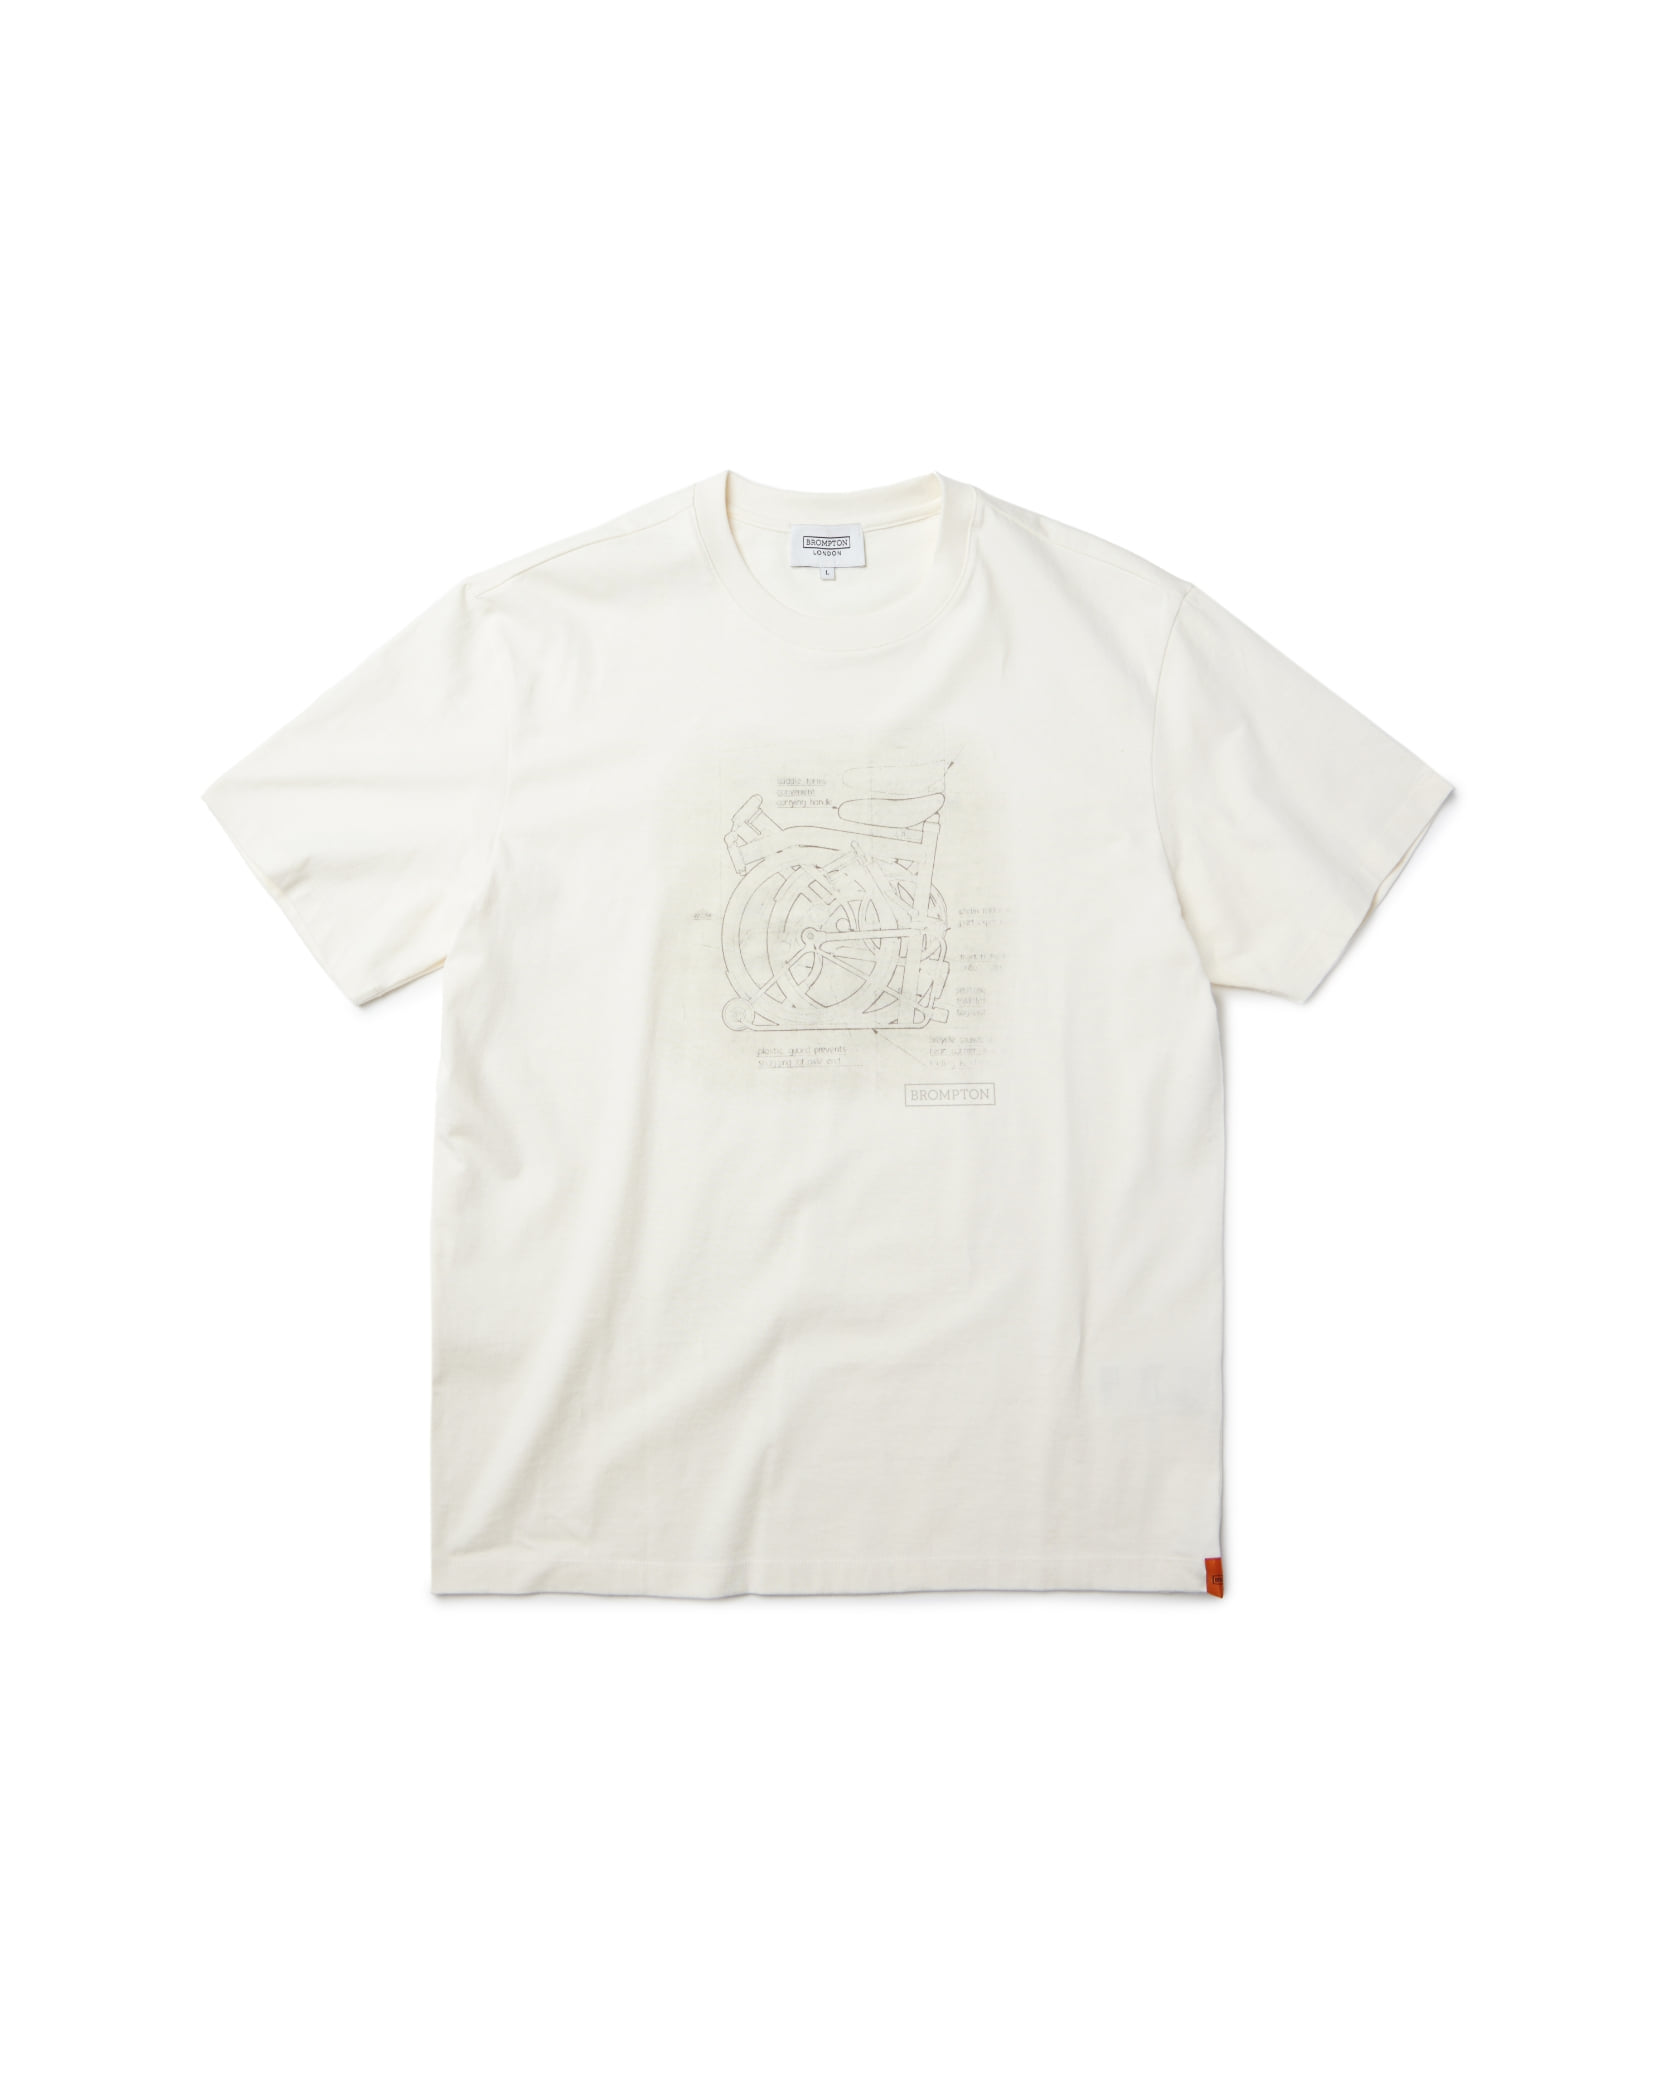 FRONT BICYCLE GRAPHIC T-SHIRT - IVORY